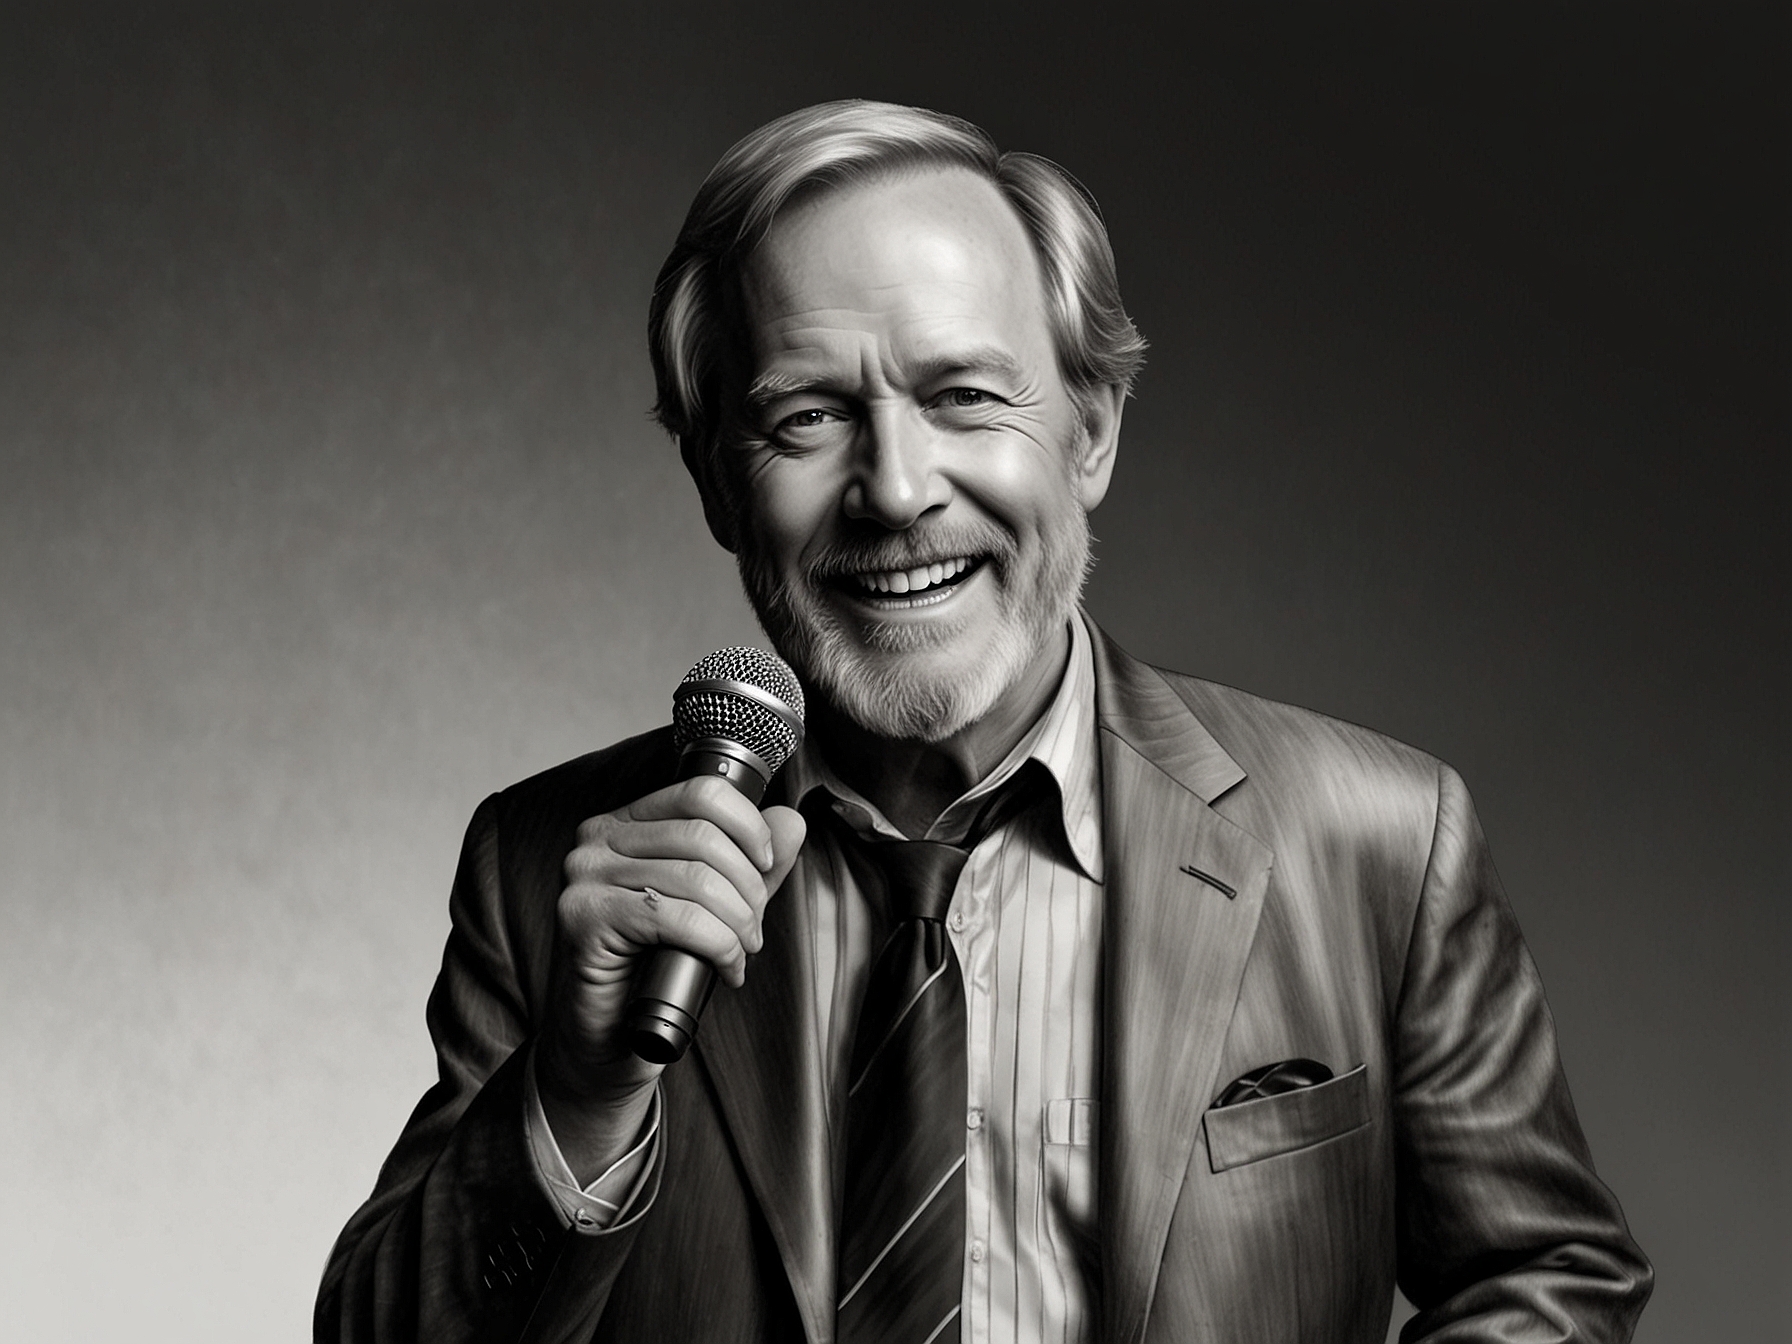 Martin Mull at a photoshoot, holding a microphone and smiling, capturing his signature blend of humor and charisma that made him a beloved figure in comedy and television.